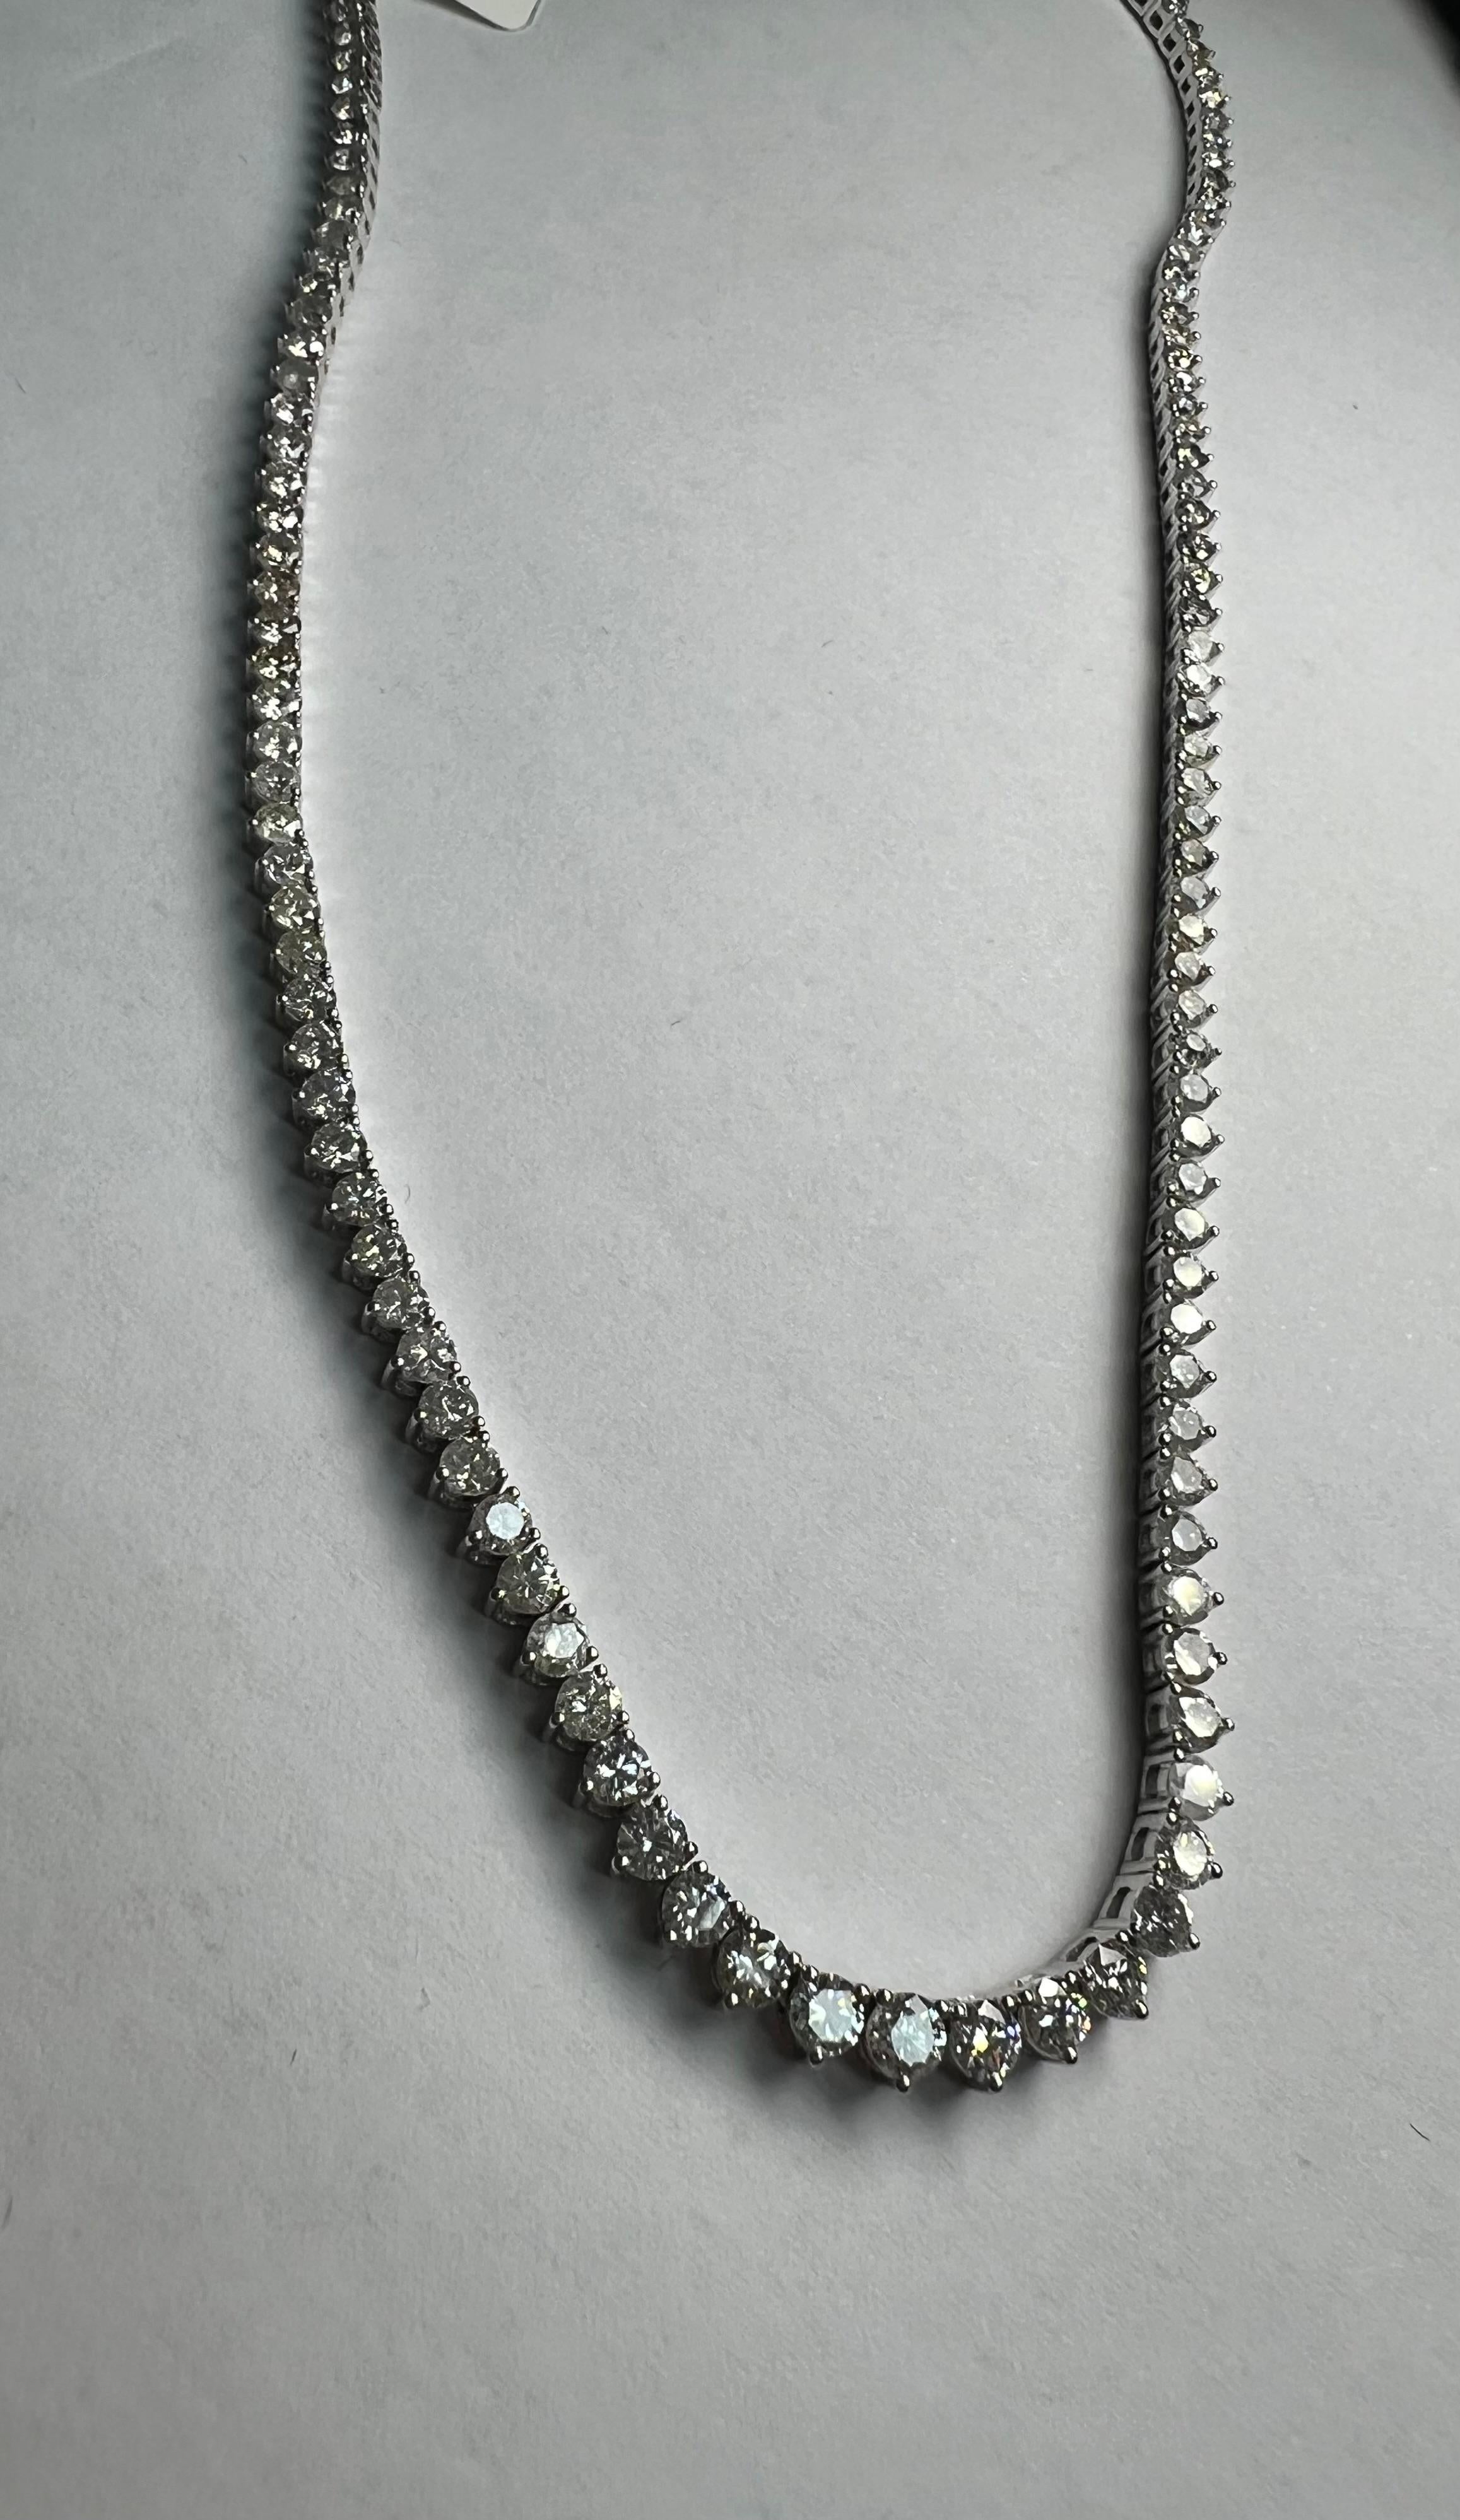 Classic Riveria 9.28 Carat w/ White Diamonds 14k White Gold Necklace

ntroducing the exquisite Classic Riviera 14k White Gold Necklace adorned with a breathtaking 9.28 carat gemstone and white Diamonds. This stunning piece of jewelry is a true